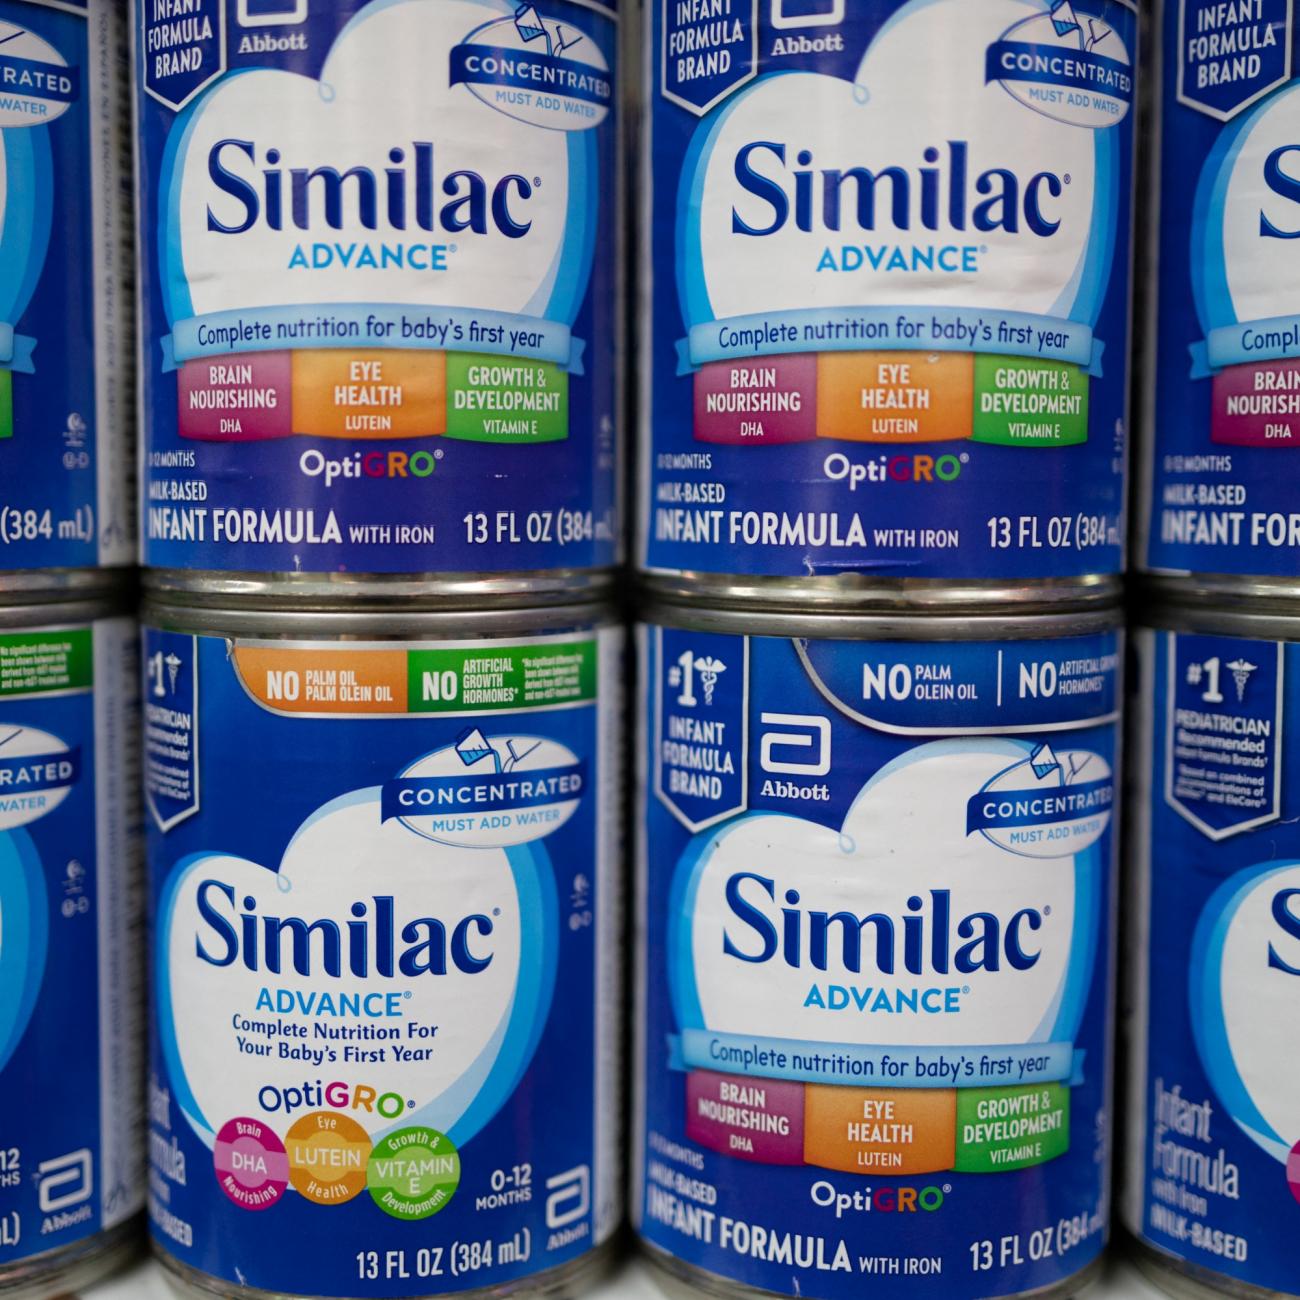 Eight blue cans of baby formula with white, orange, and green labels that read "Similac" stand in stacks of two on a pharmacy shelf.